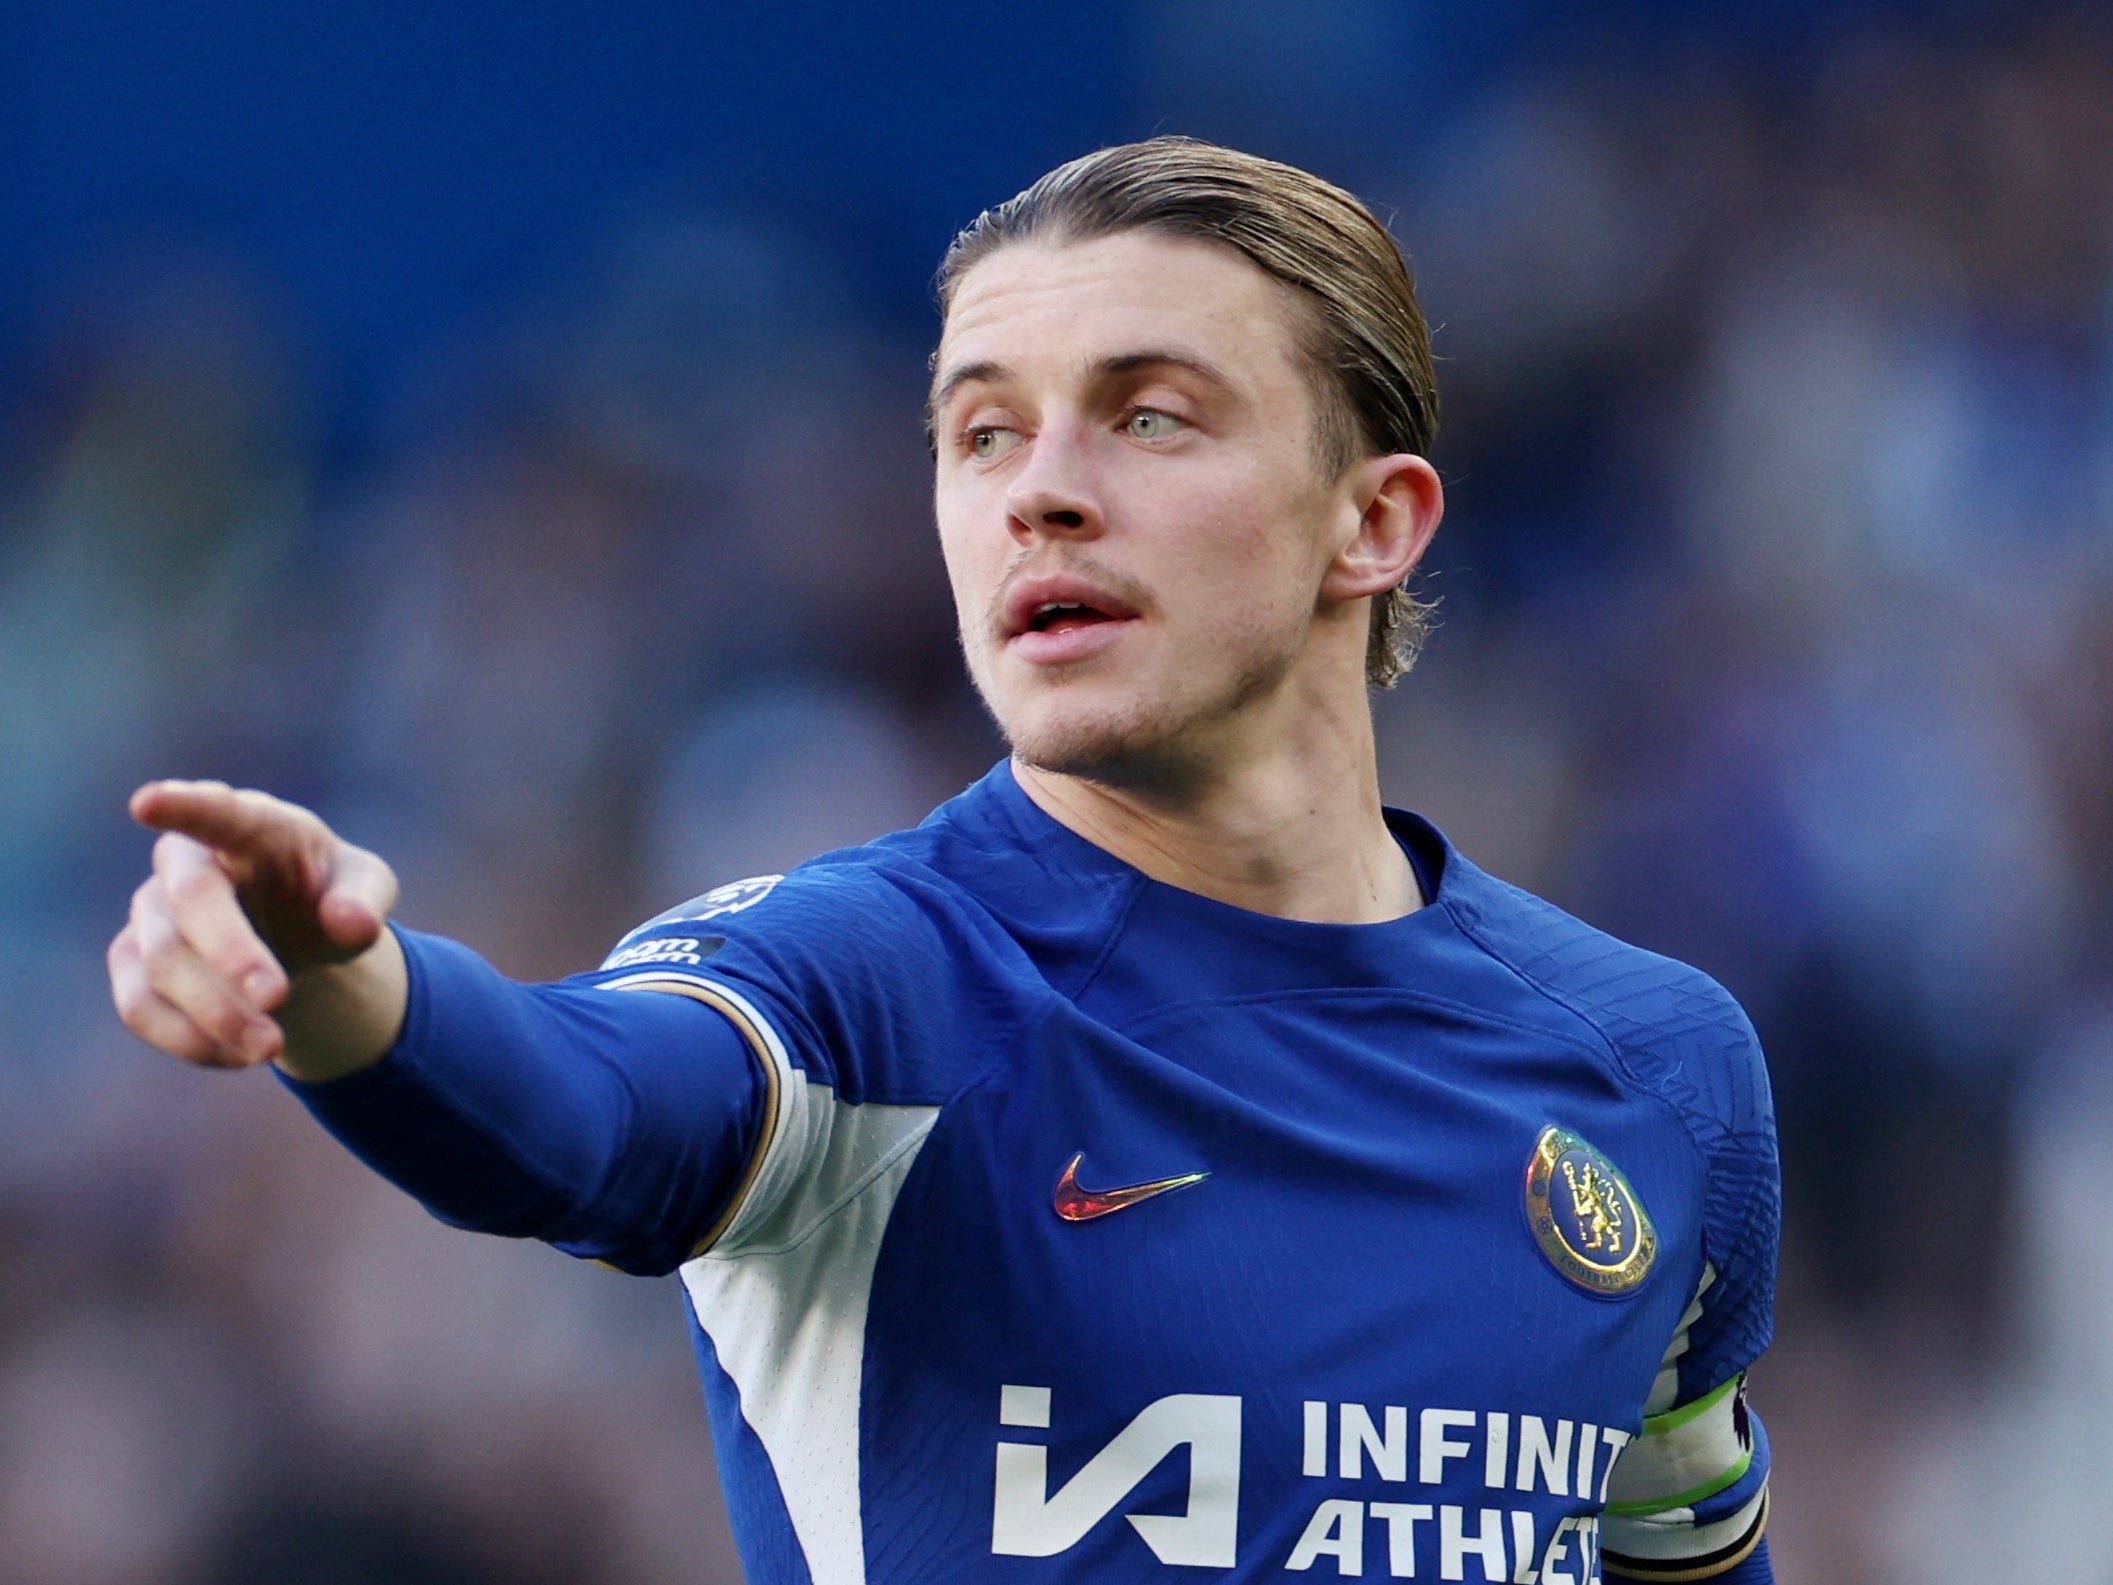 Chelsea’s Conor Gallagher has suffered abuse following a viral video